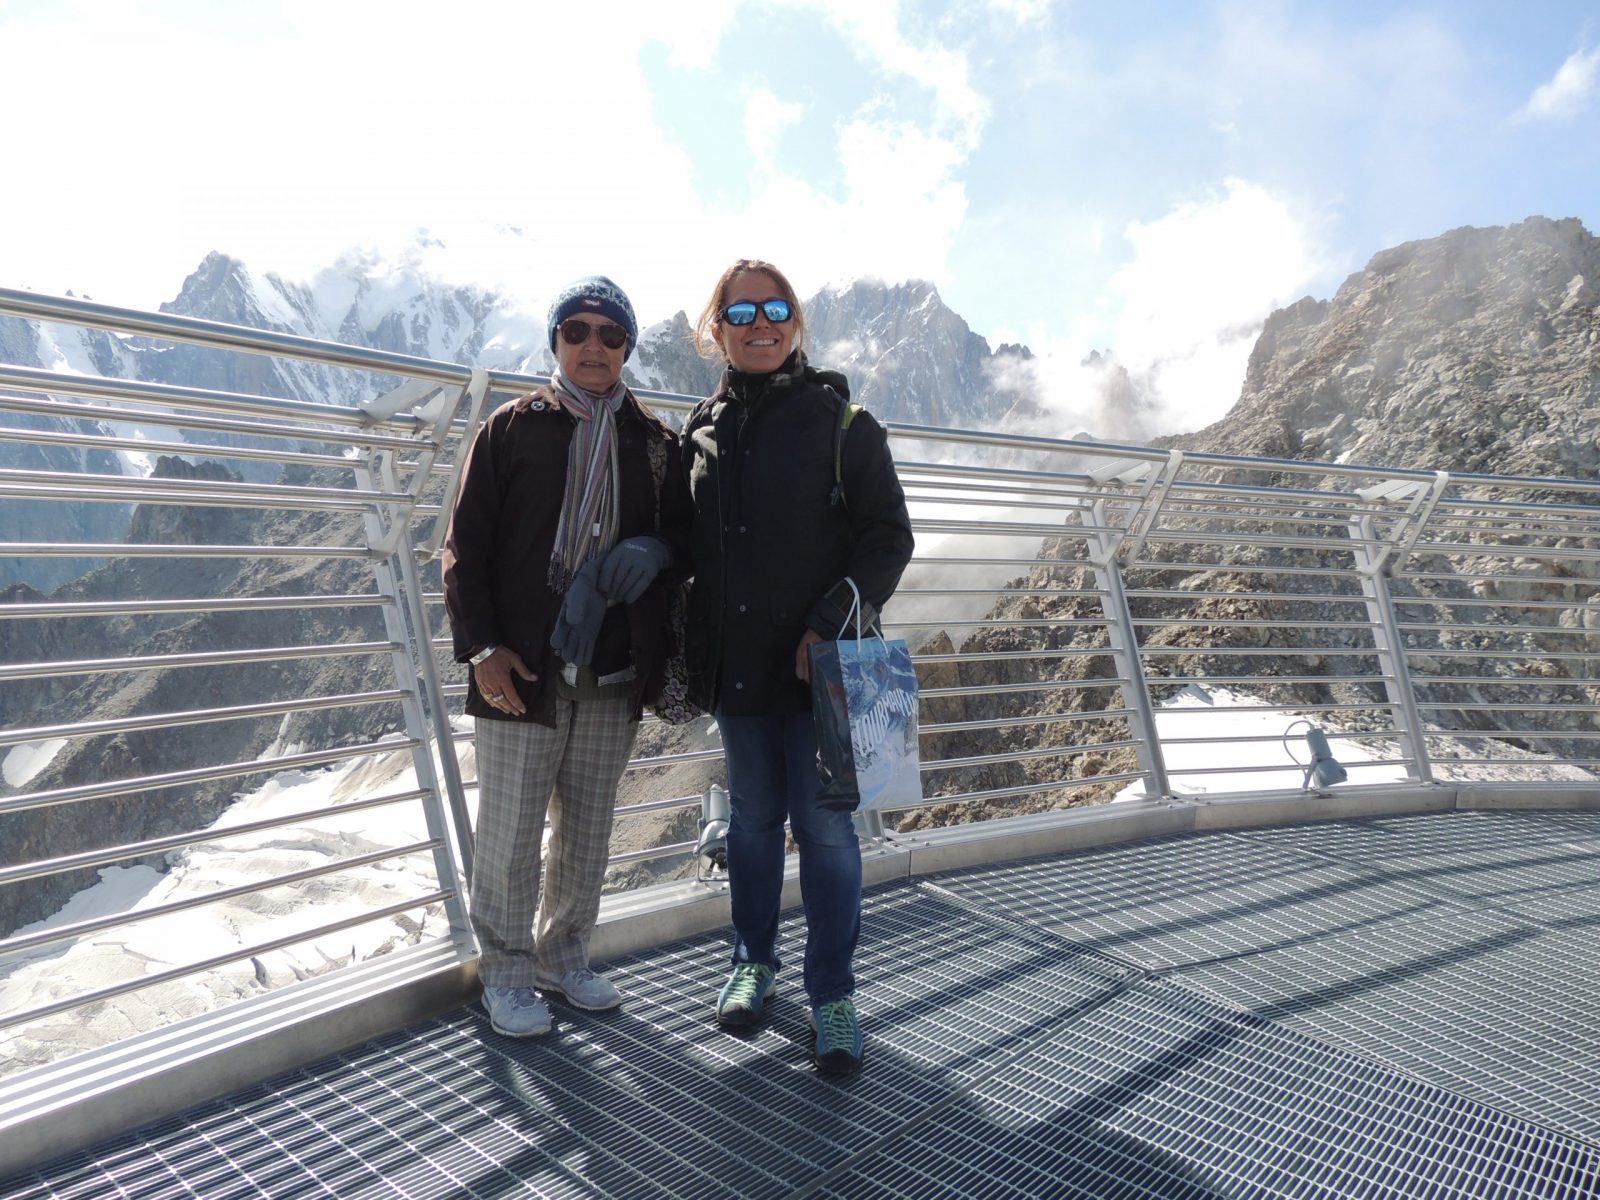 With my mum on top of the terrace at Punta Helbronner. Aiguille du Midi vs Punta Helbronner – which one you should do?